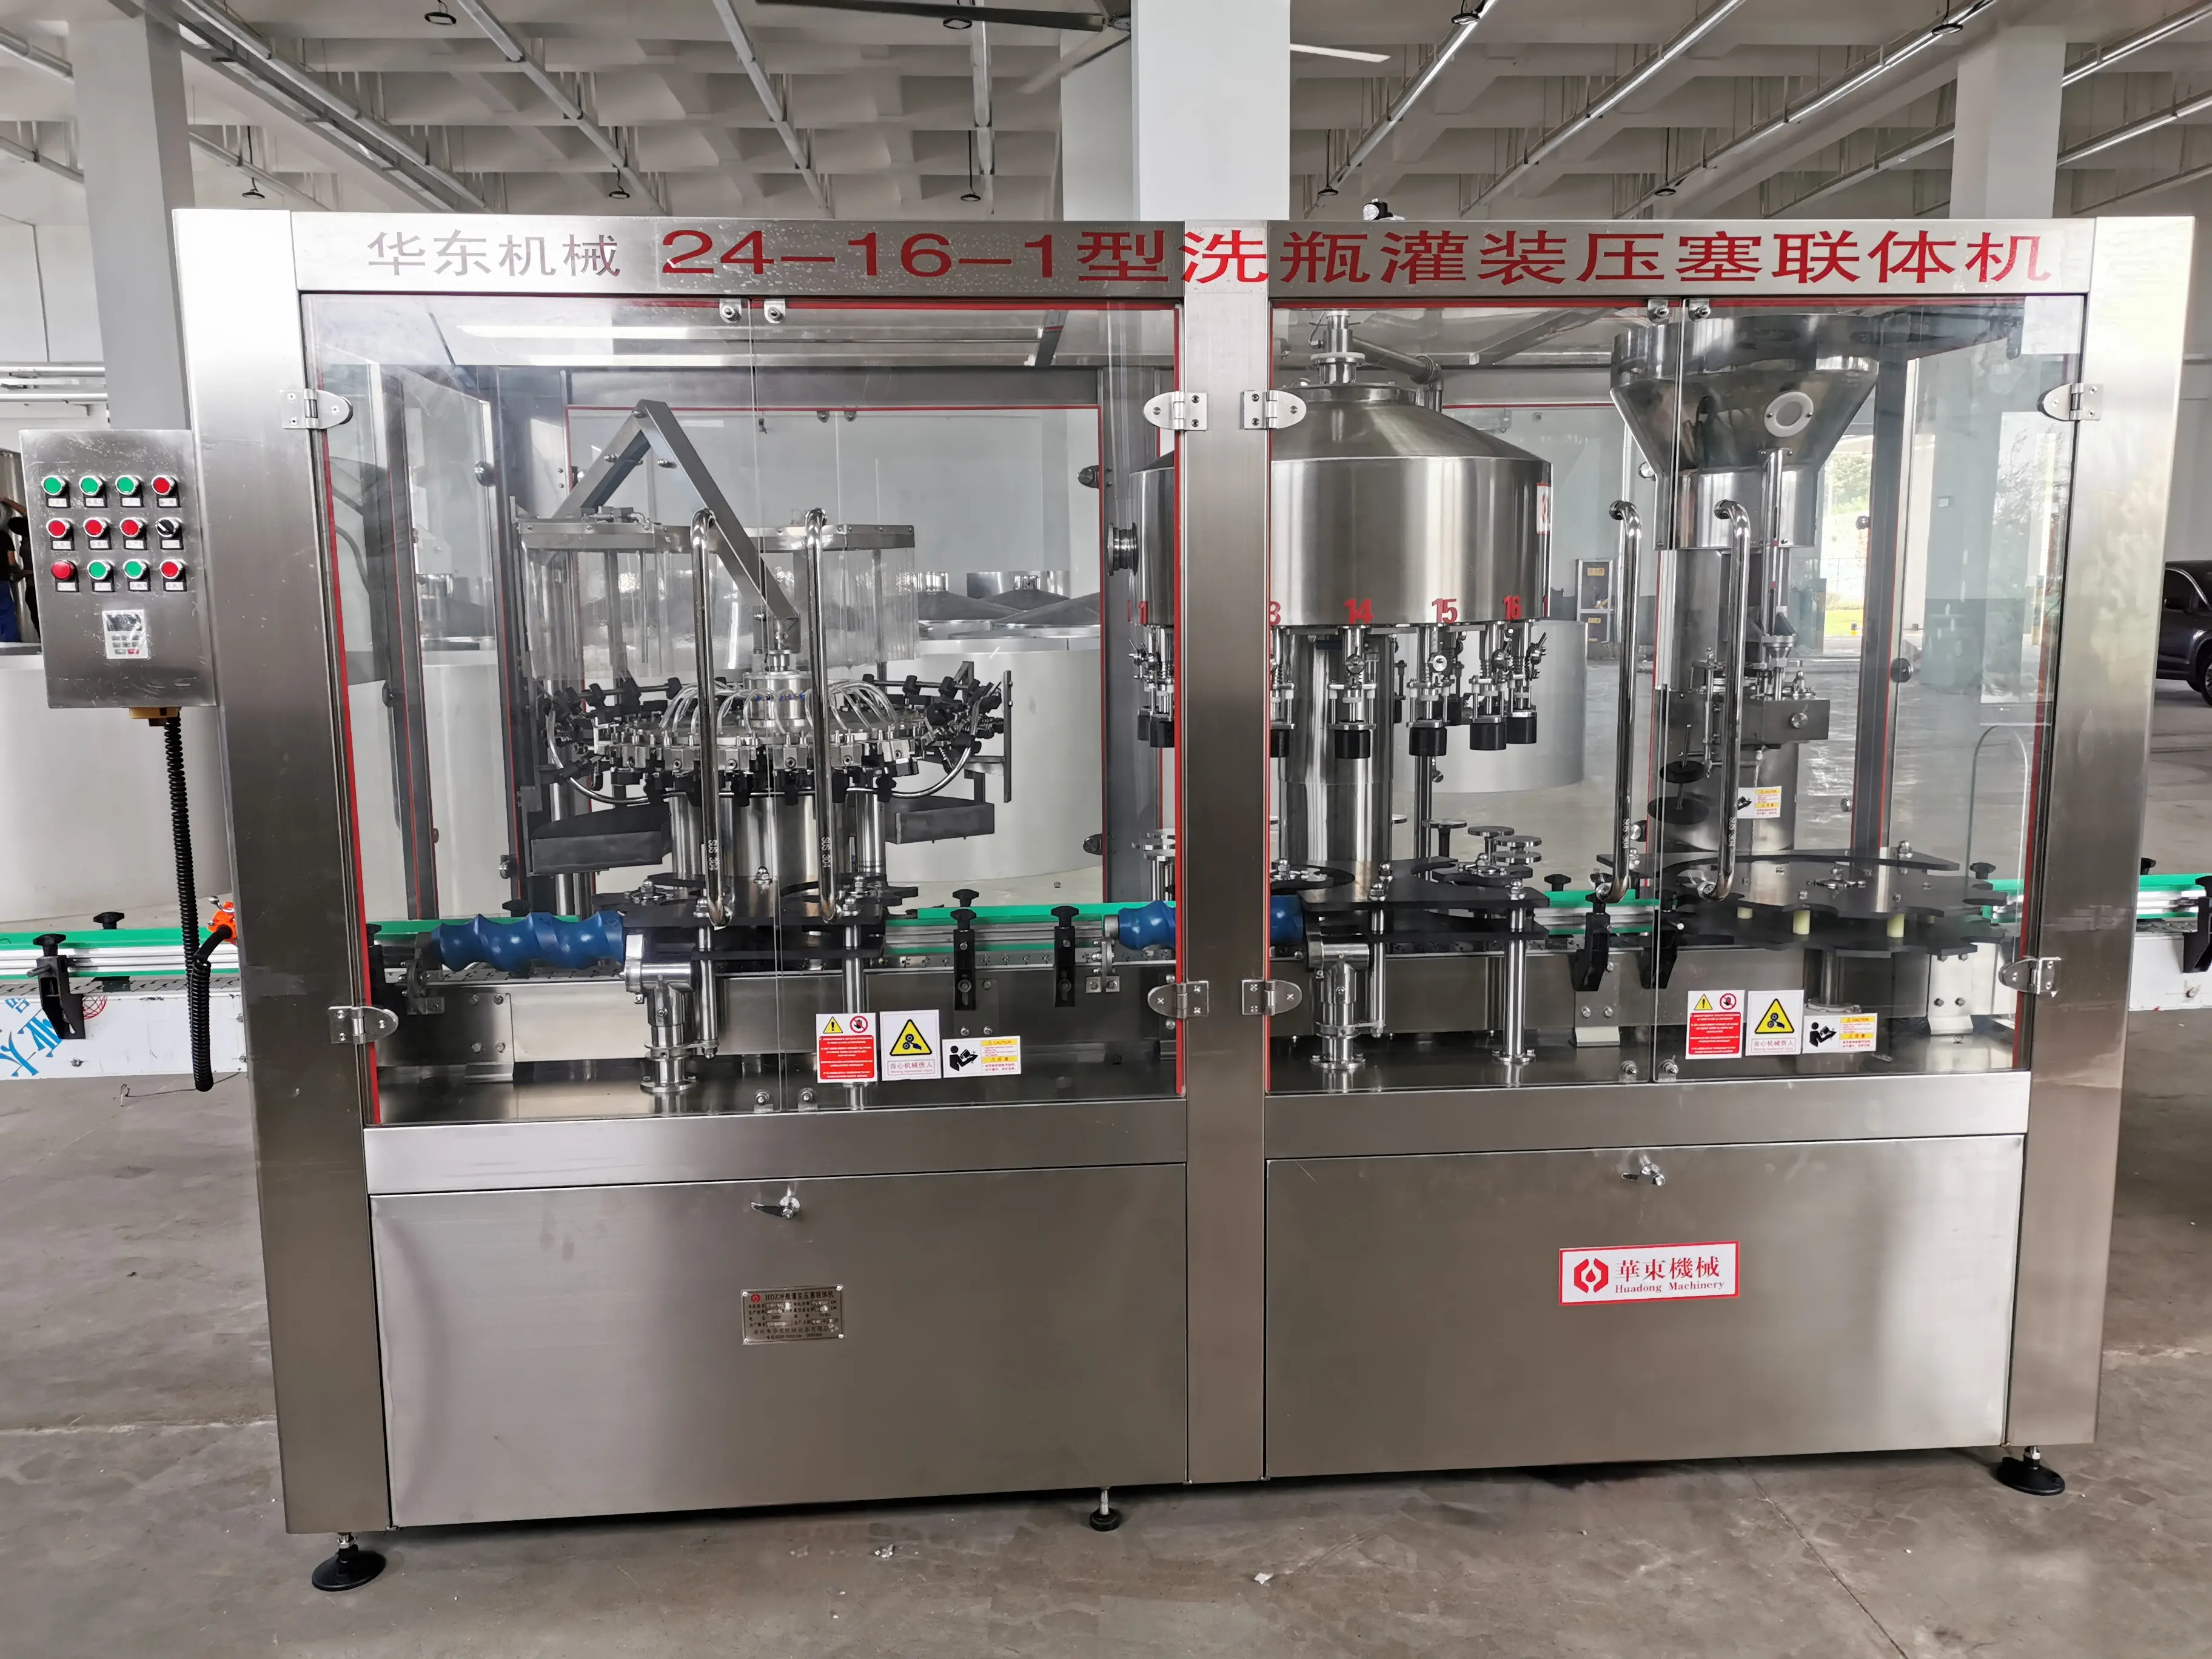 Three-head Weft Machine HDZ-20-16-1 Contact Parts And Tanks Full 304/316 Stainless Steel Cleaning Machine